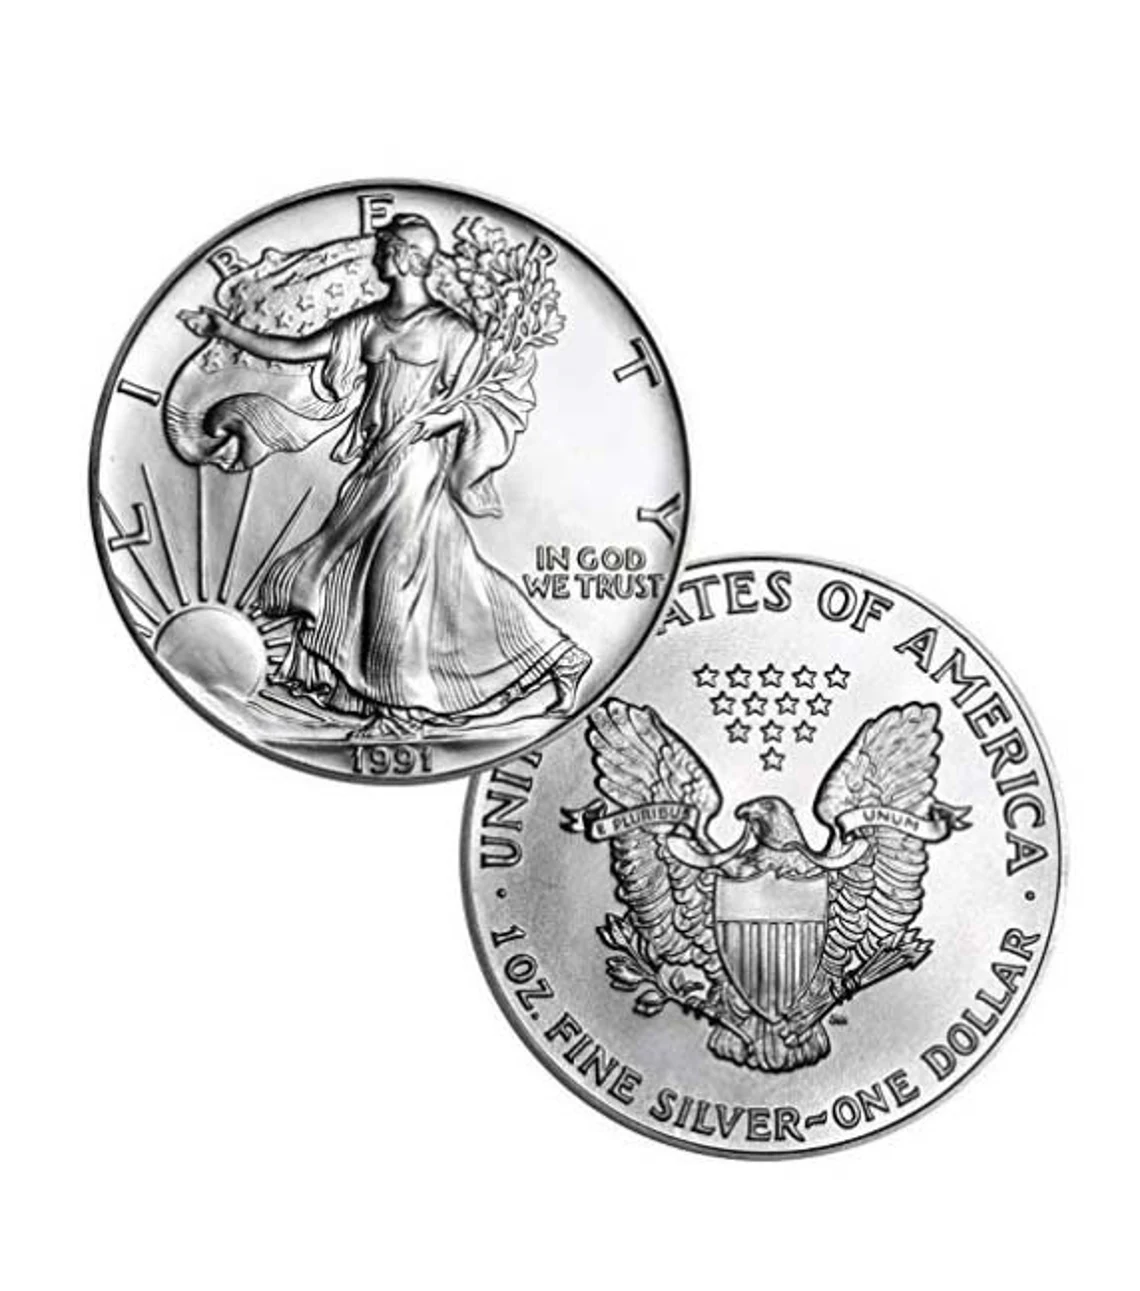 1986 or 1988 or 1991 or 1992 or 1993 American Silver Eagle 1 Dollar